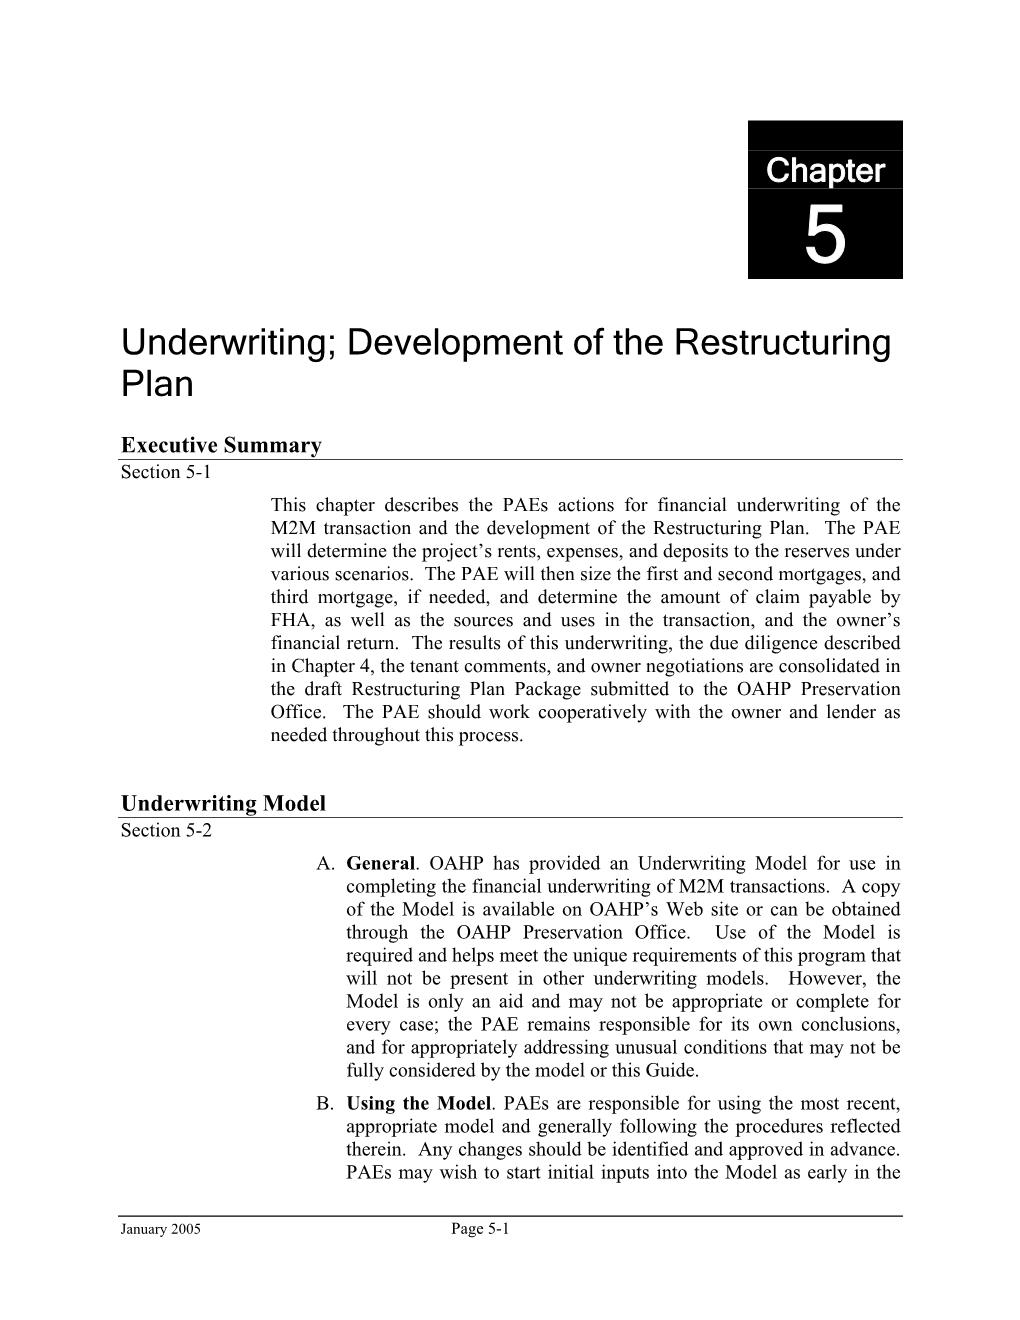 Underwriting; Development of the Restructuring Plan